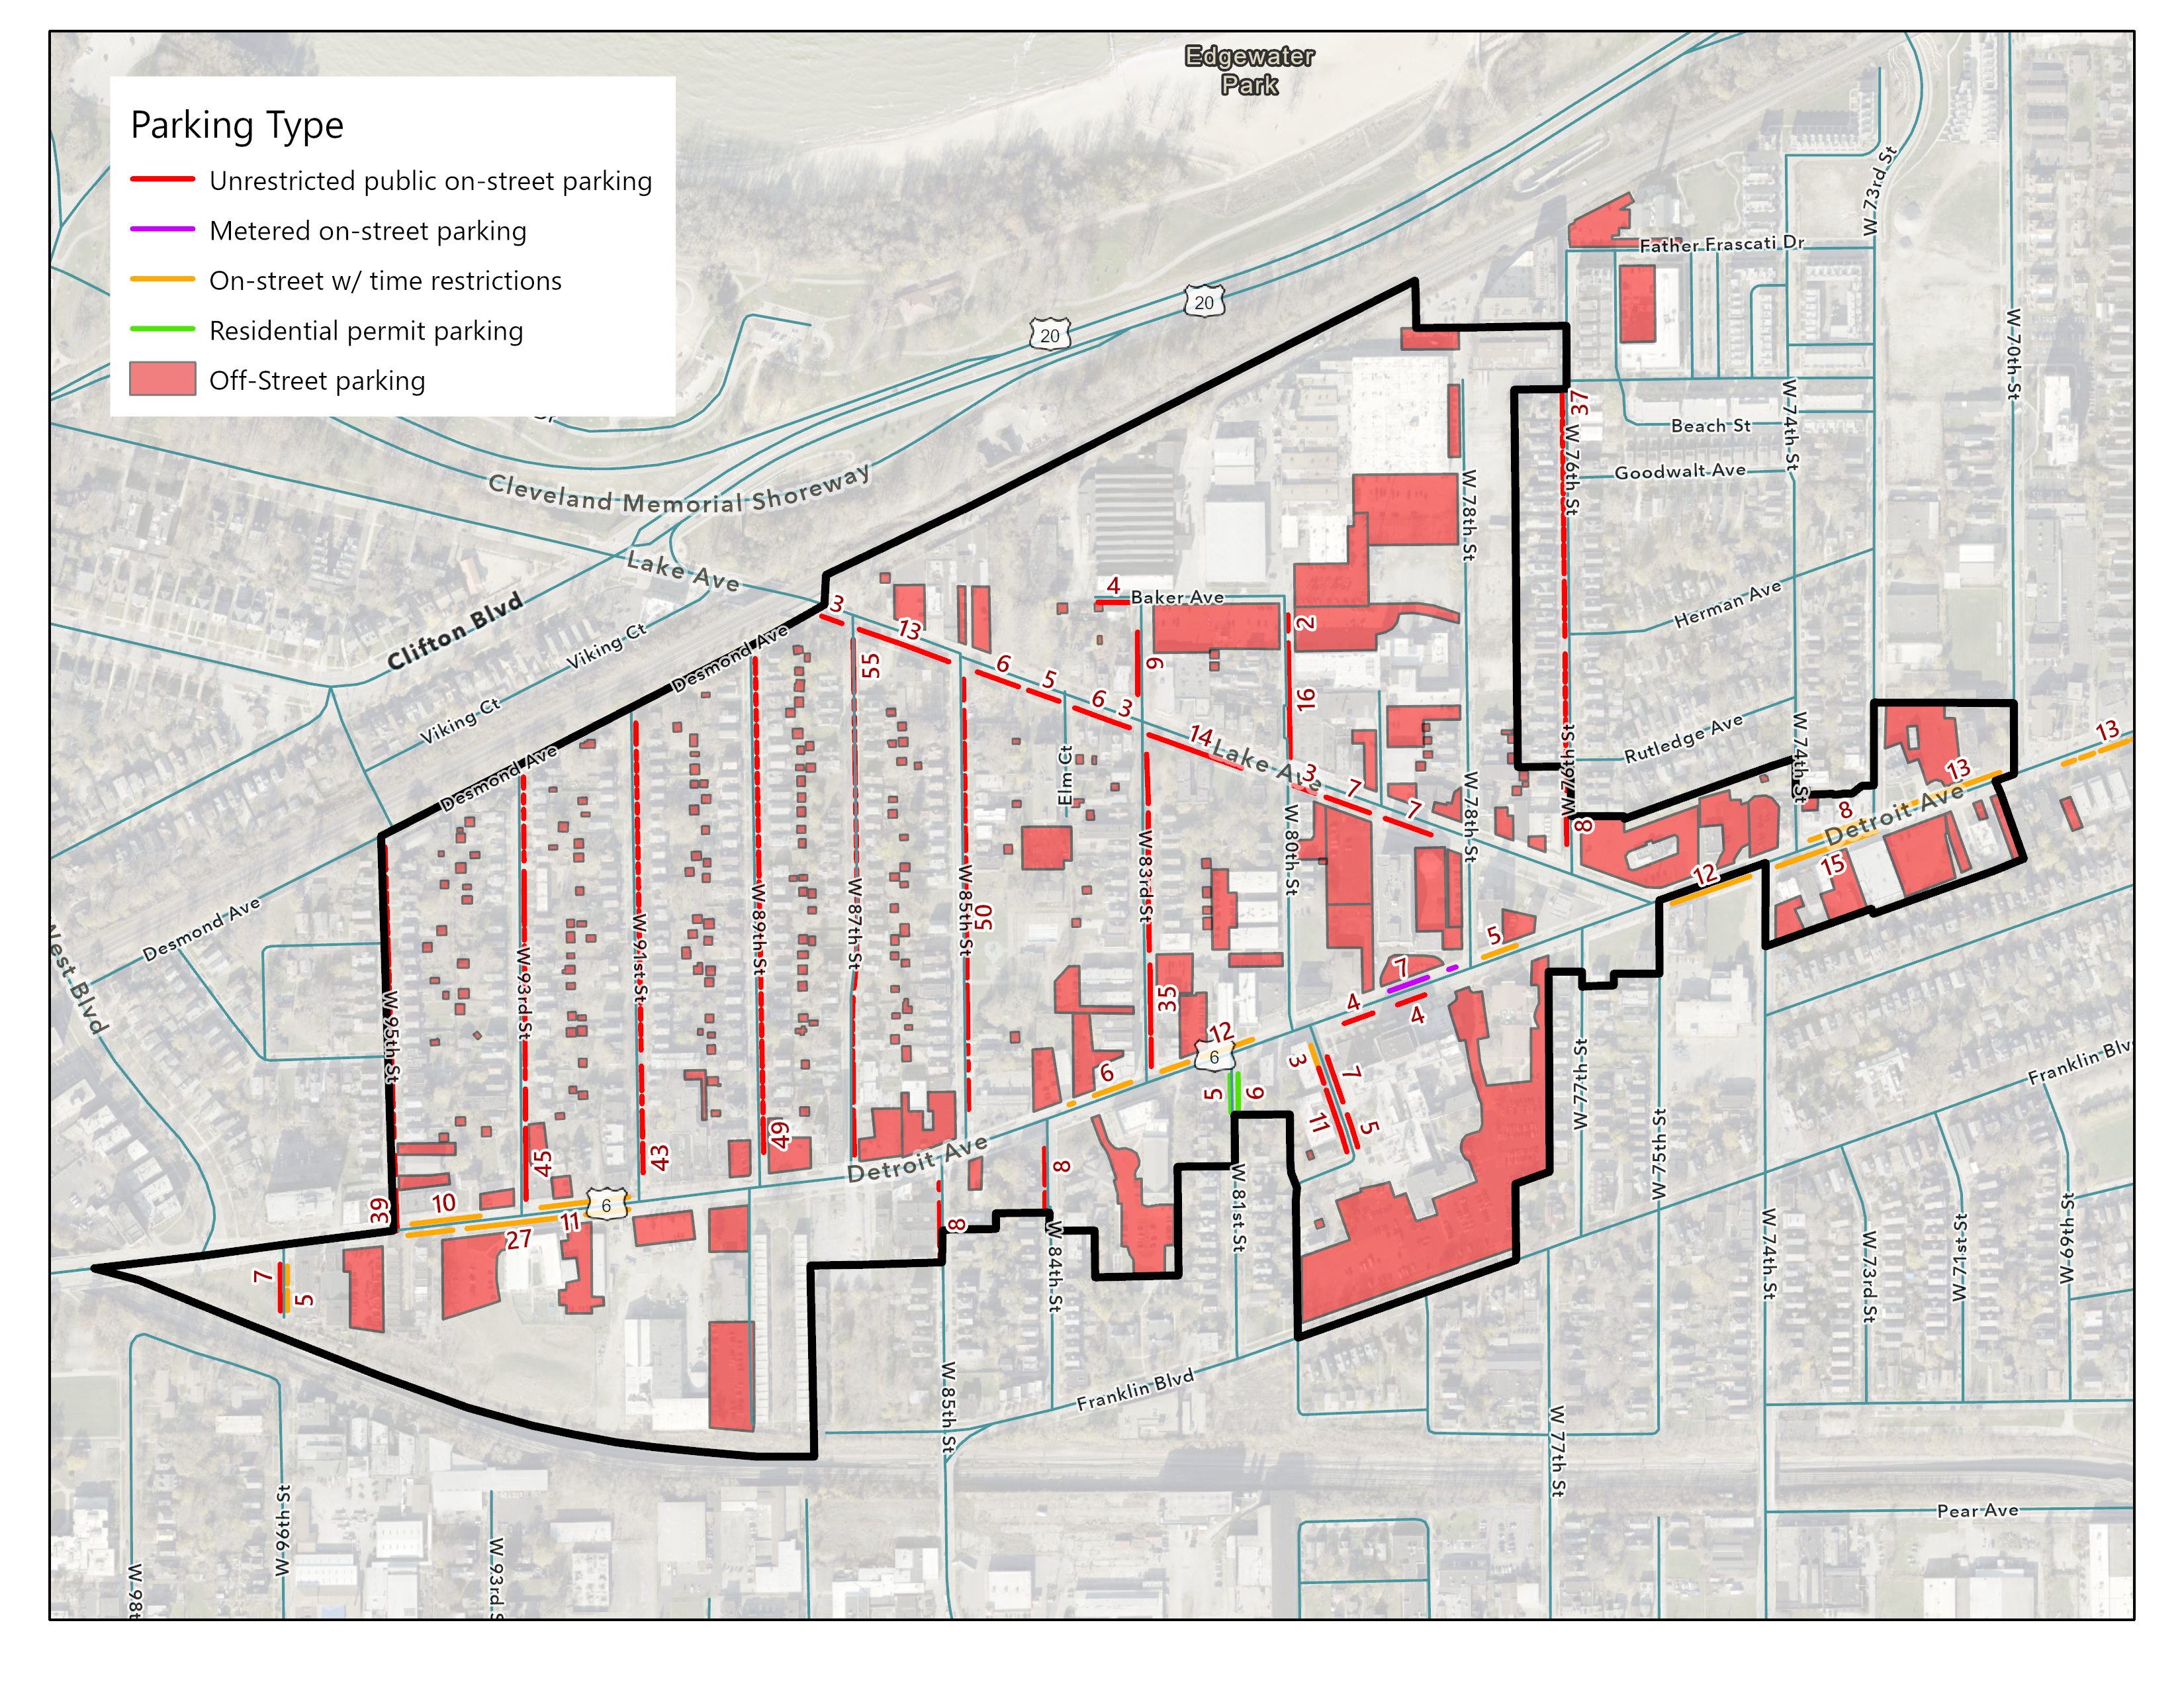 Existing parking availability study